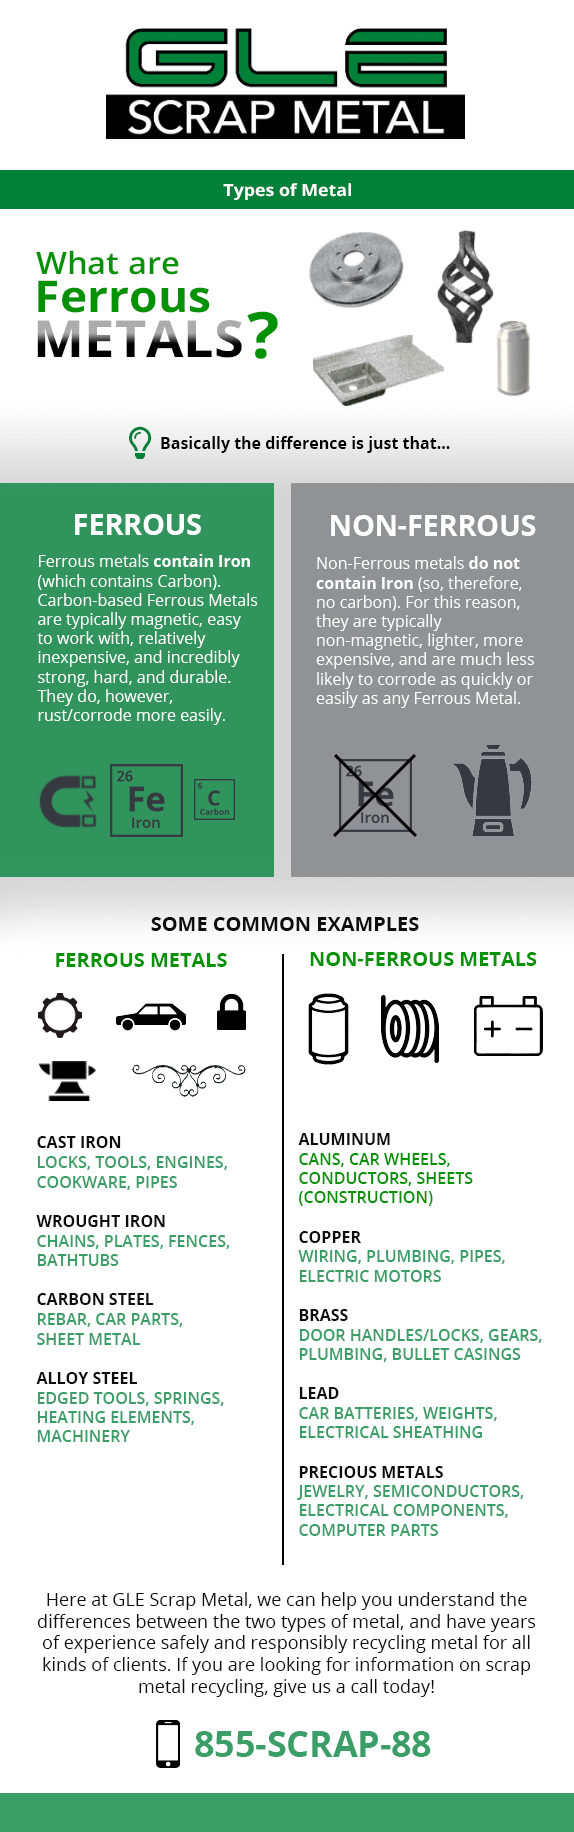 Know the Difference Between Ferrous and Non-Ferrous Metals